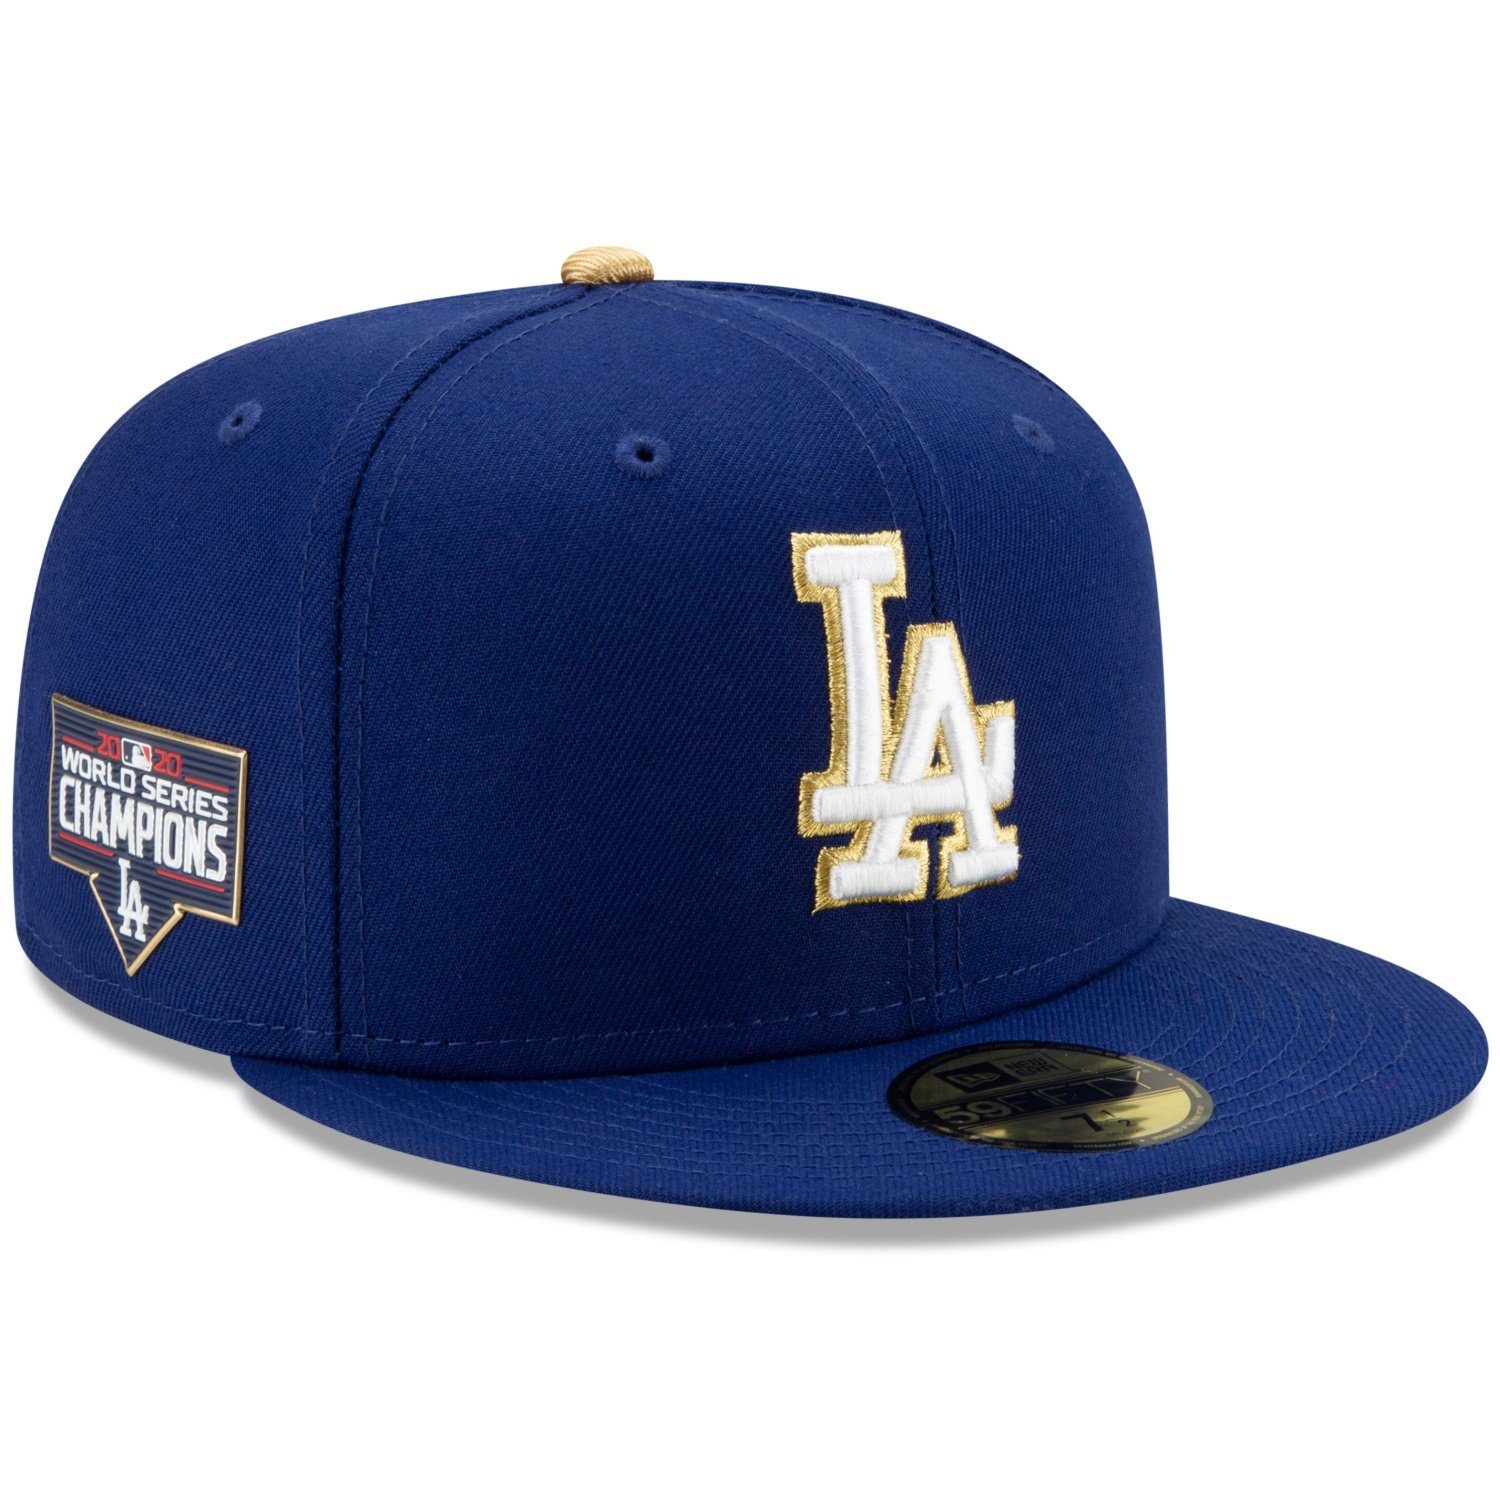 New Era Fitted Cap 59Fifty WORLD SERIES GOLD LA Dodgers